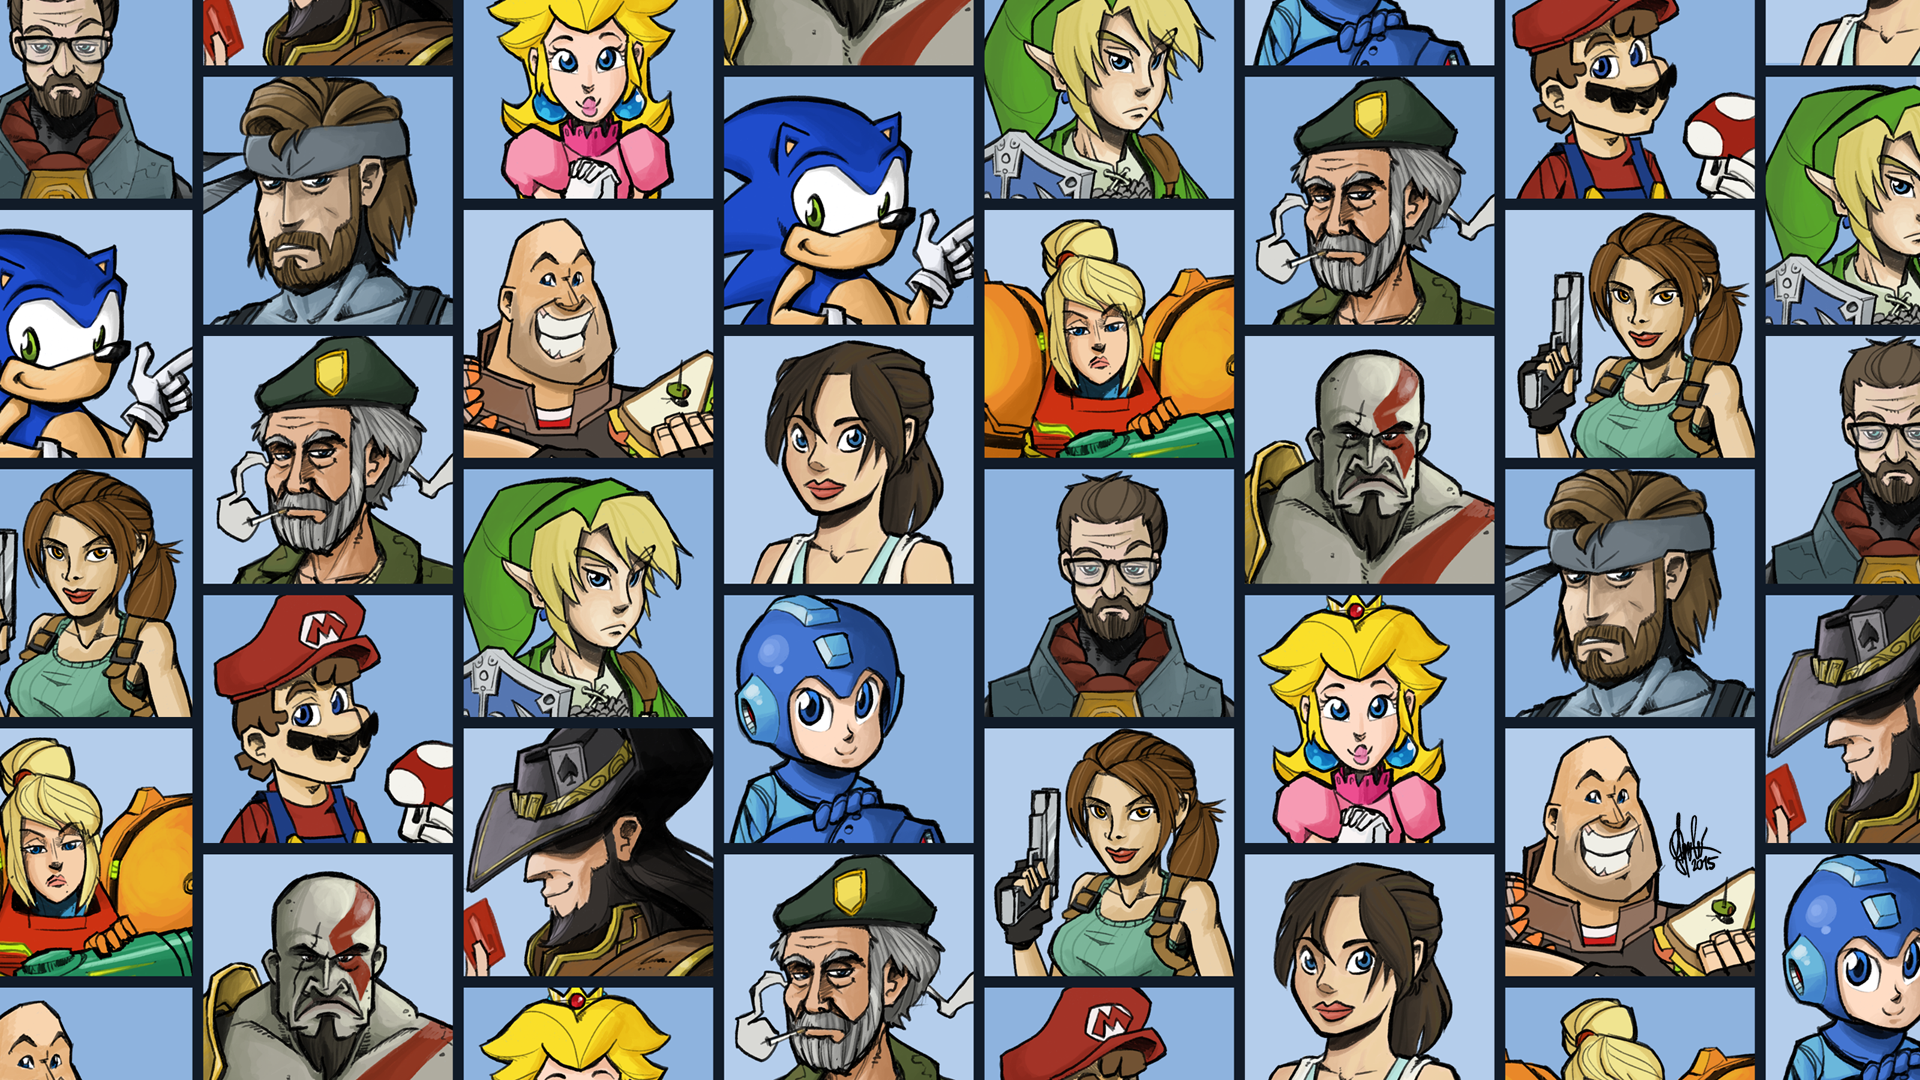 Video Game English wallpaper by TheArtrix on DeviantArt